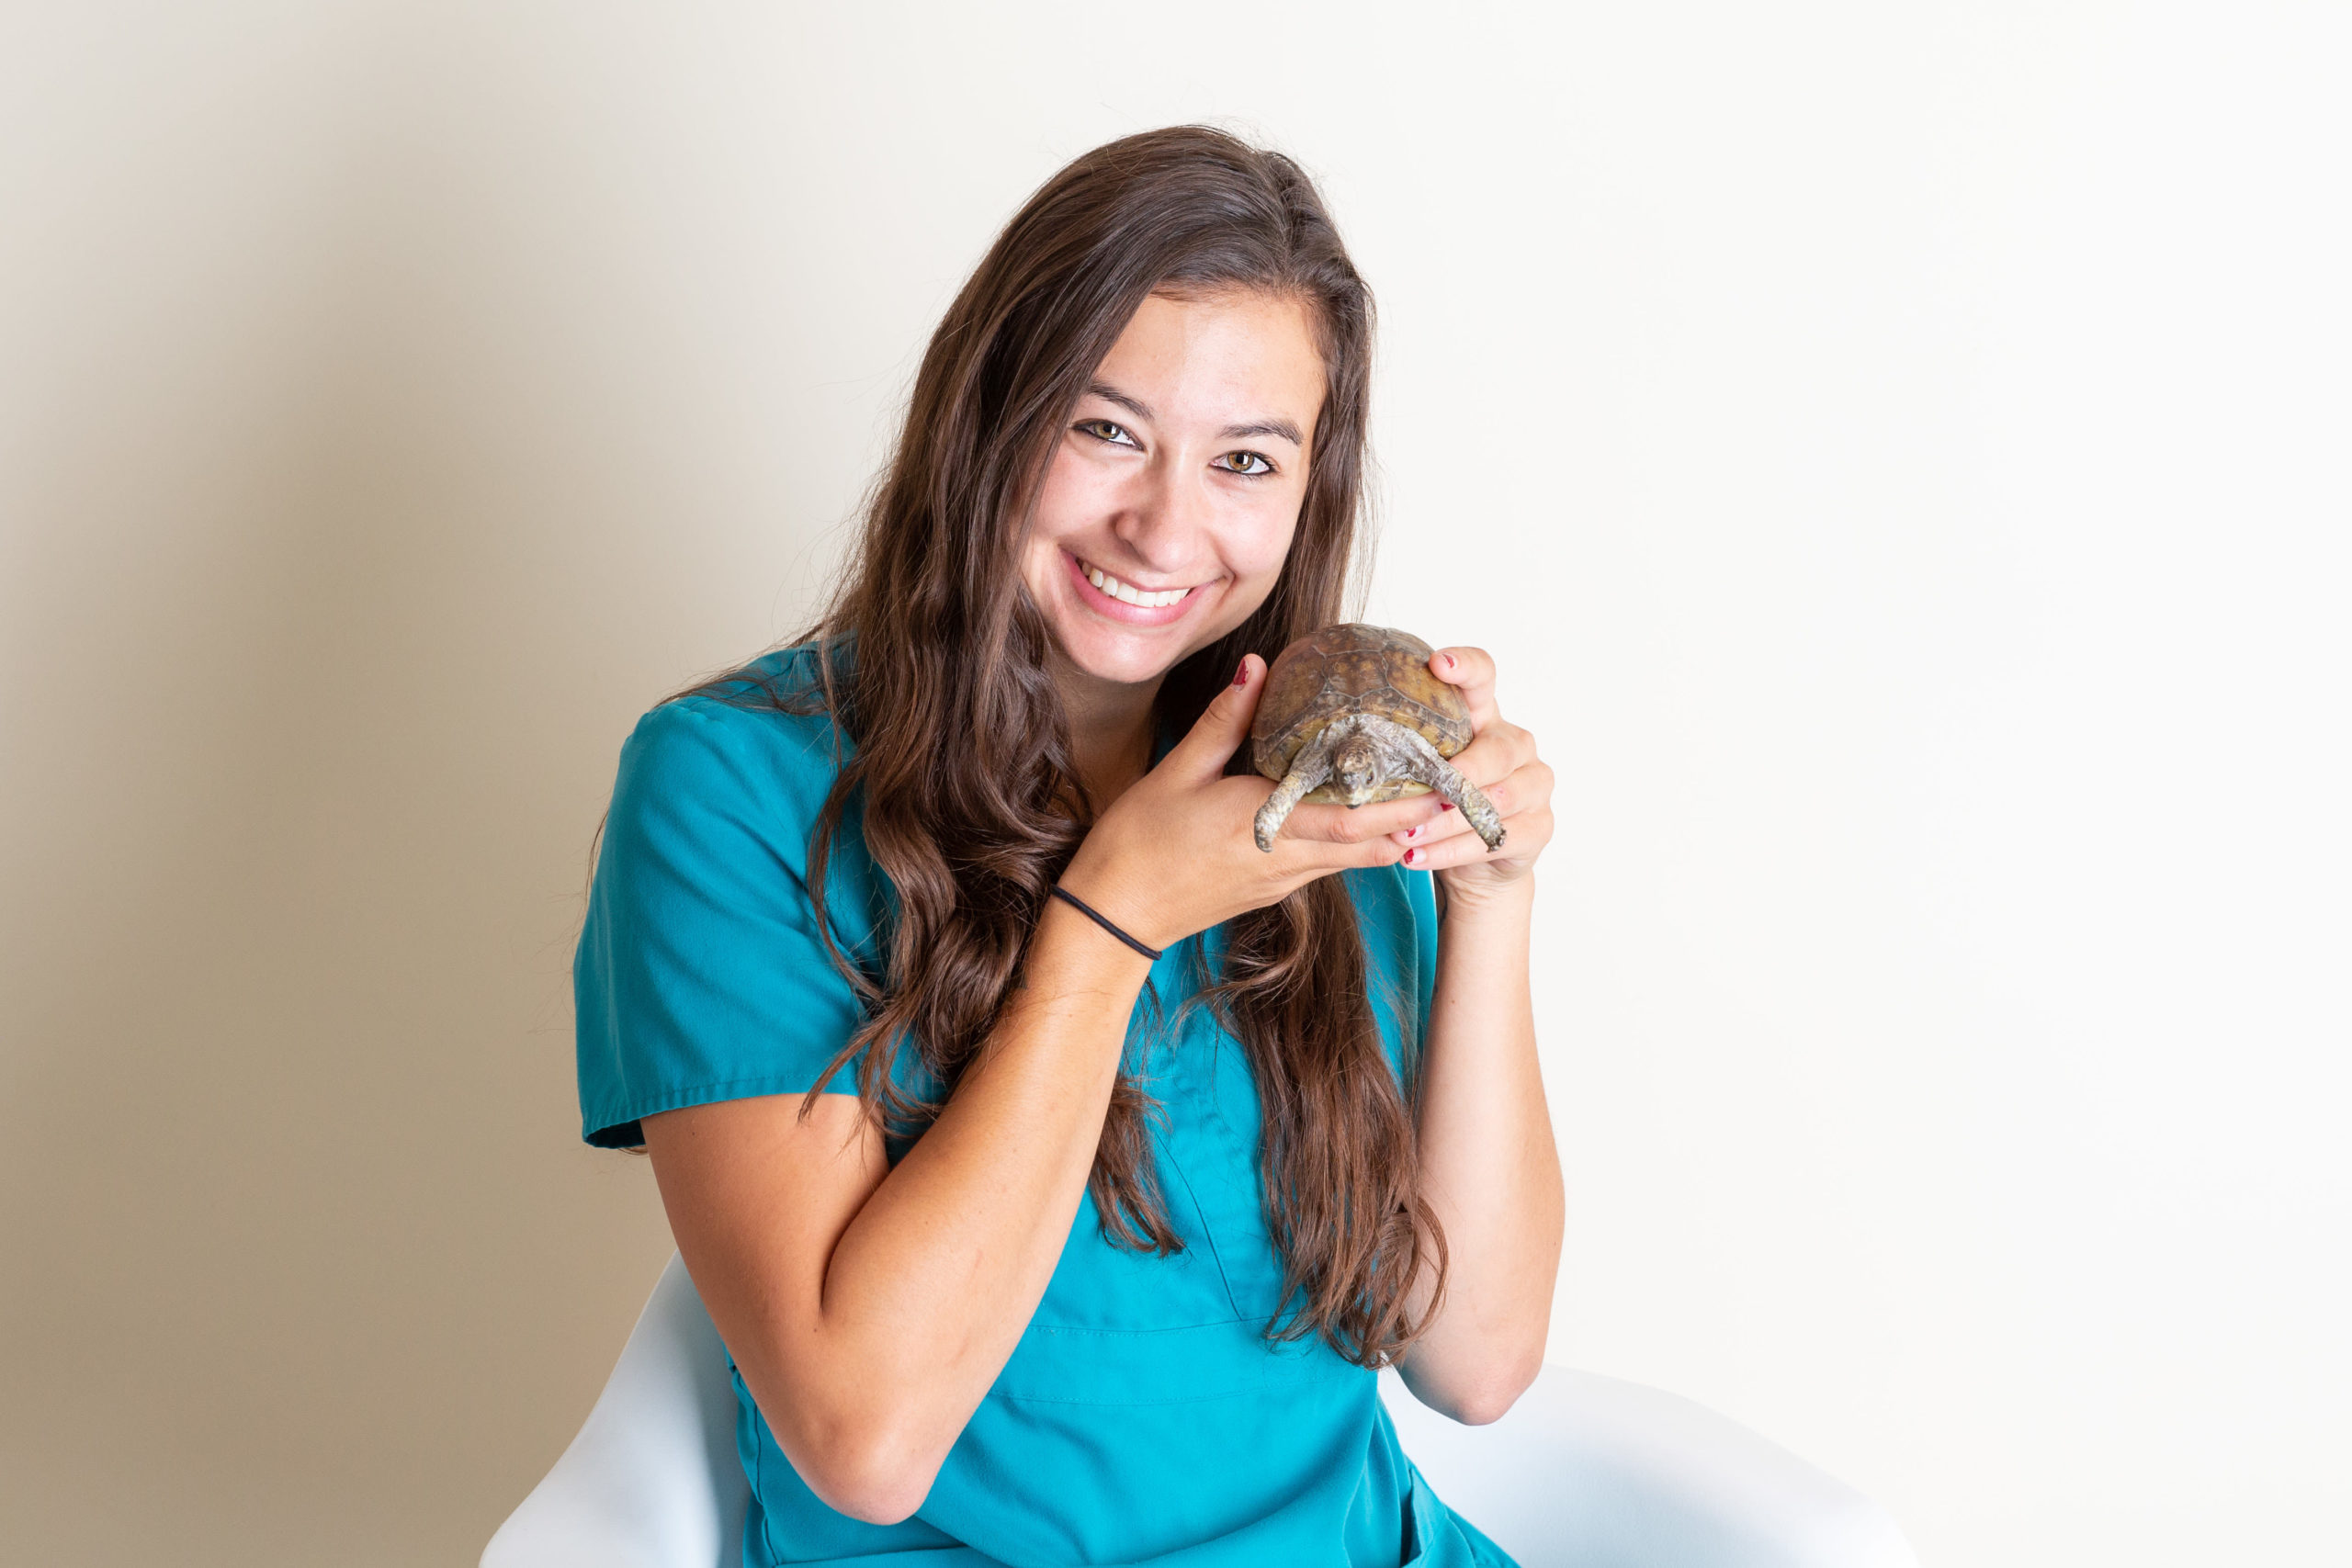 Bre, with long dark hair, wearing teal scrubs, is holding up a turtle and smiling.